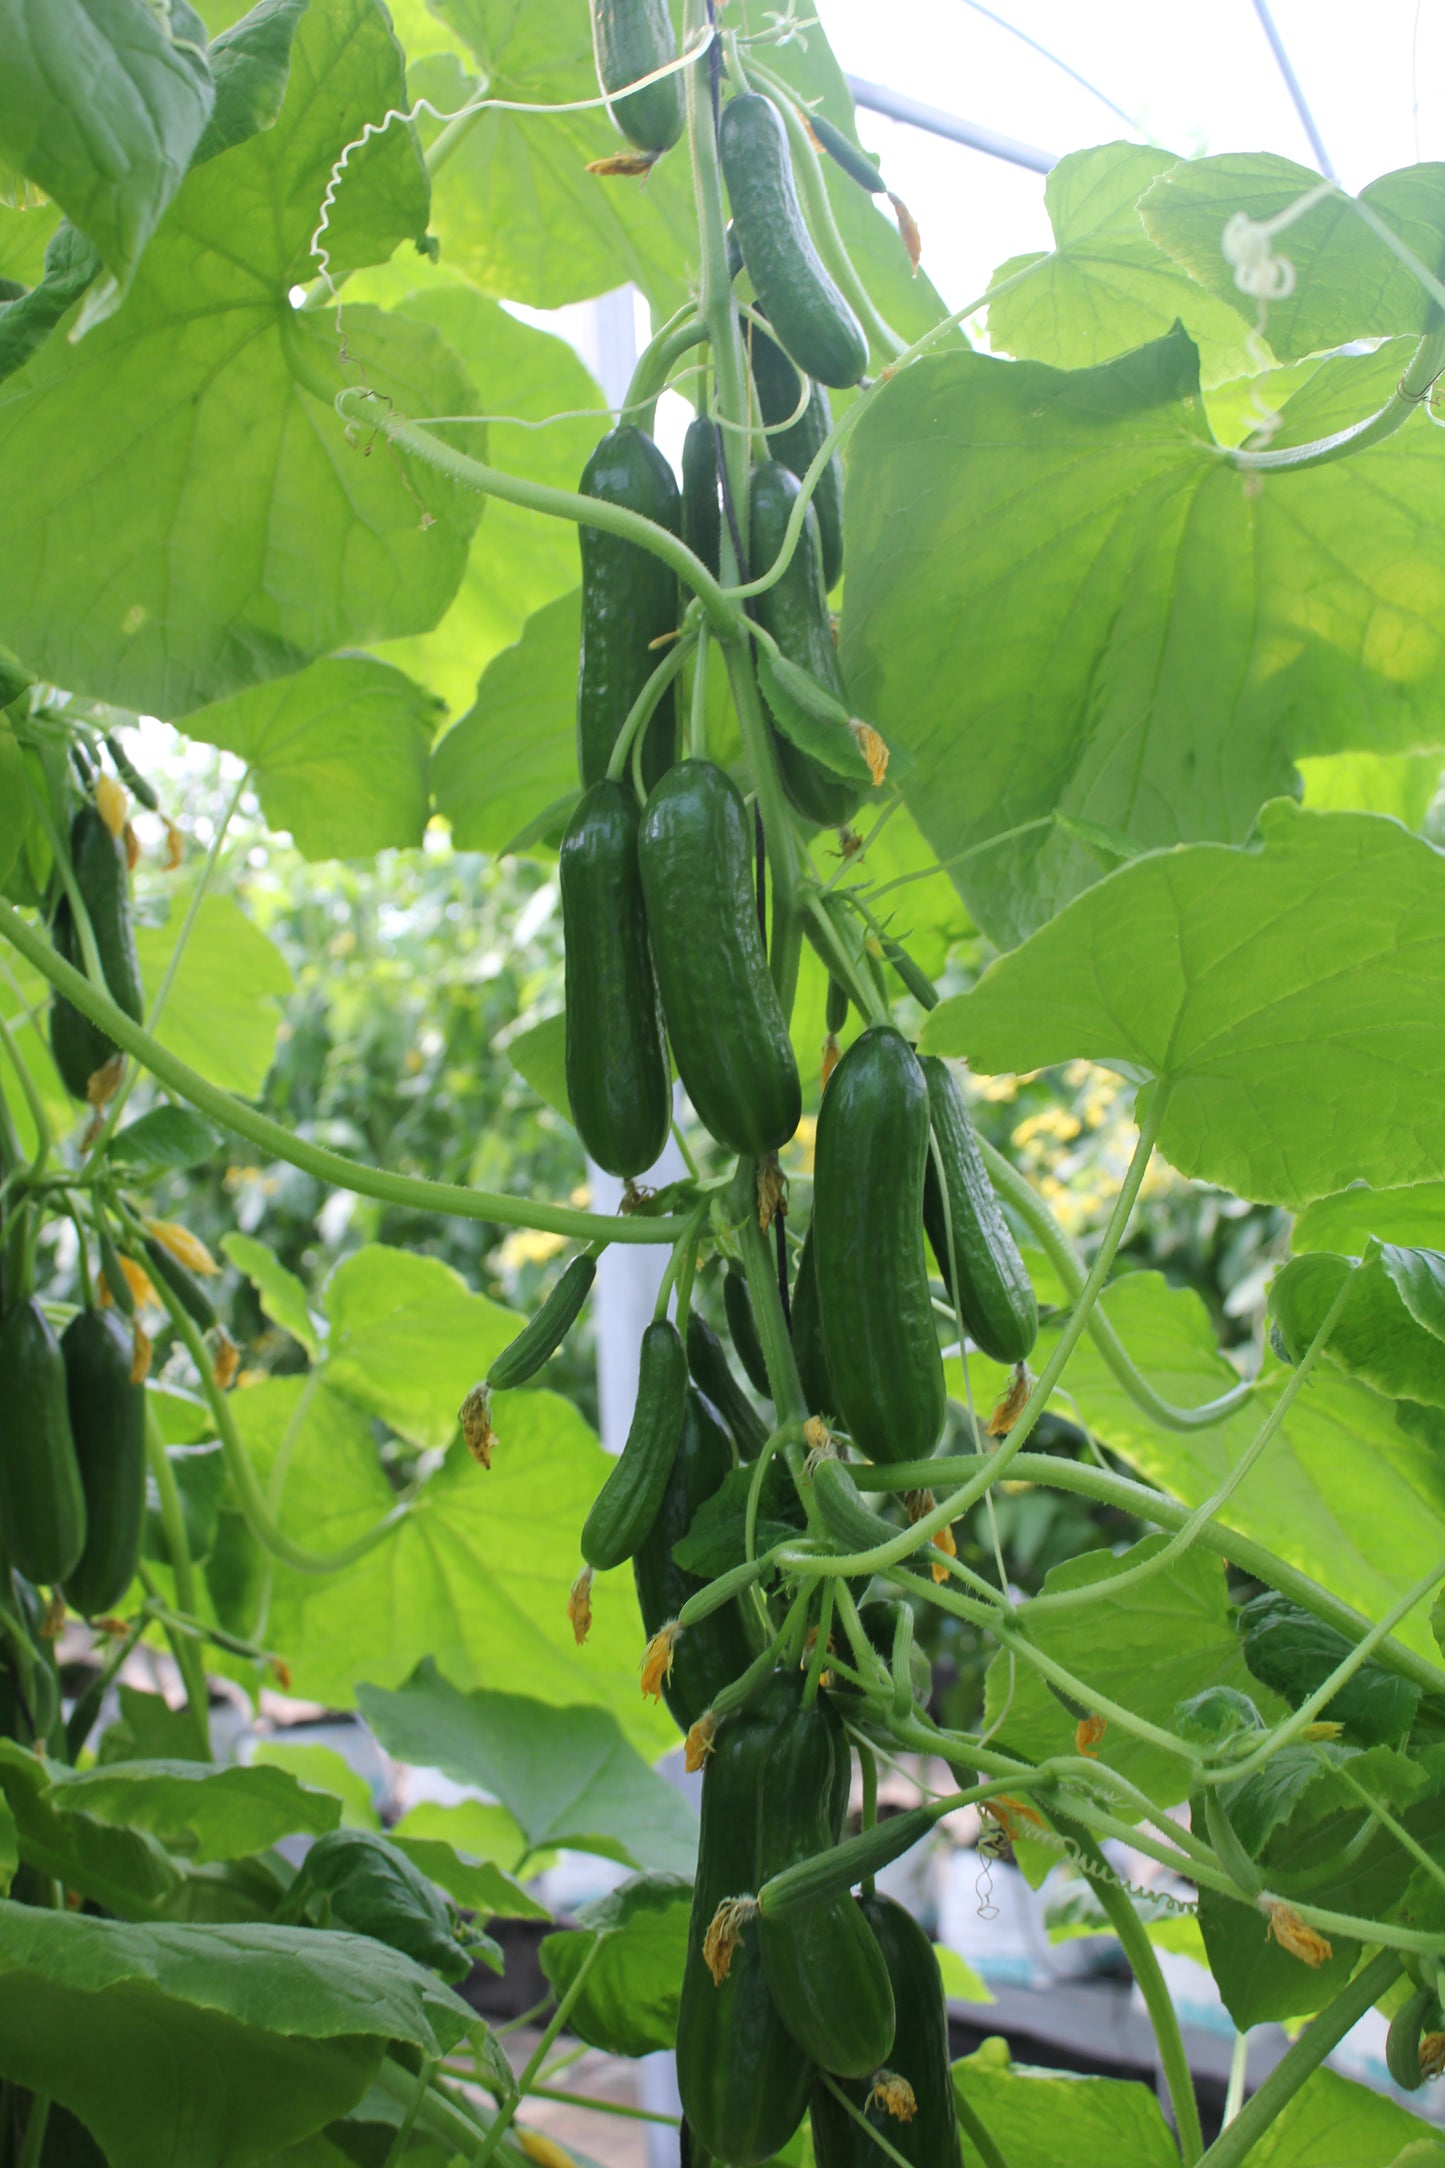 Cucumber Plug Plants "Grow Your Own" Fruit 'Ready to Plant Now' Young Vegetable Plants **Letterbox Friendly**